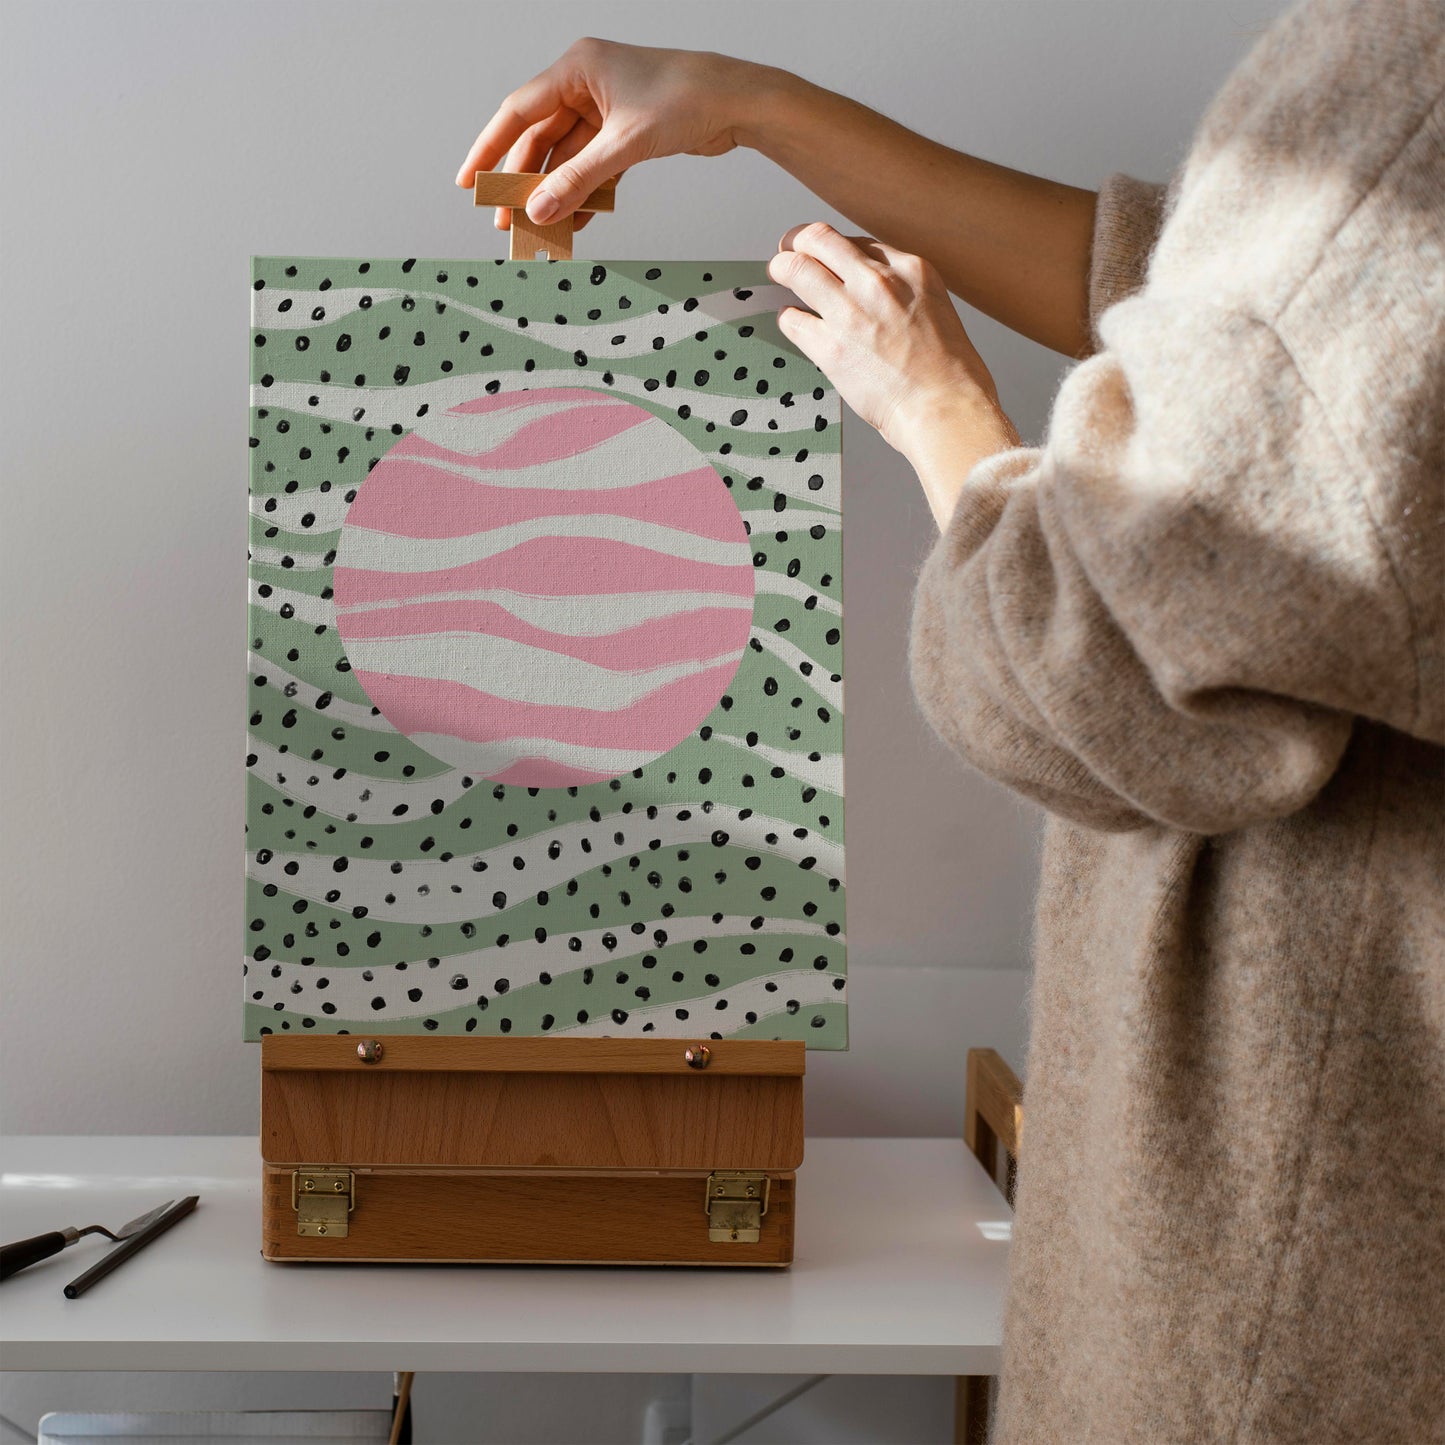 Mint Cute Sun with Dots Canvas Print